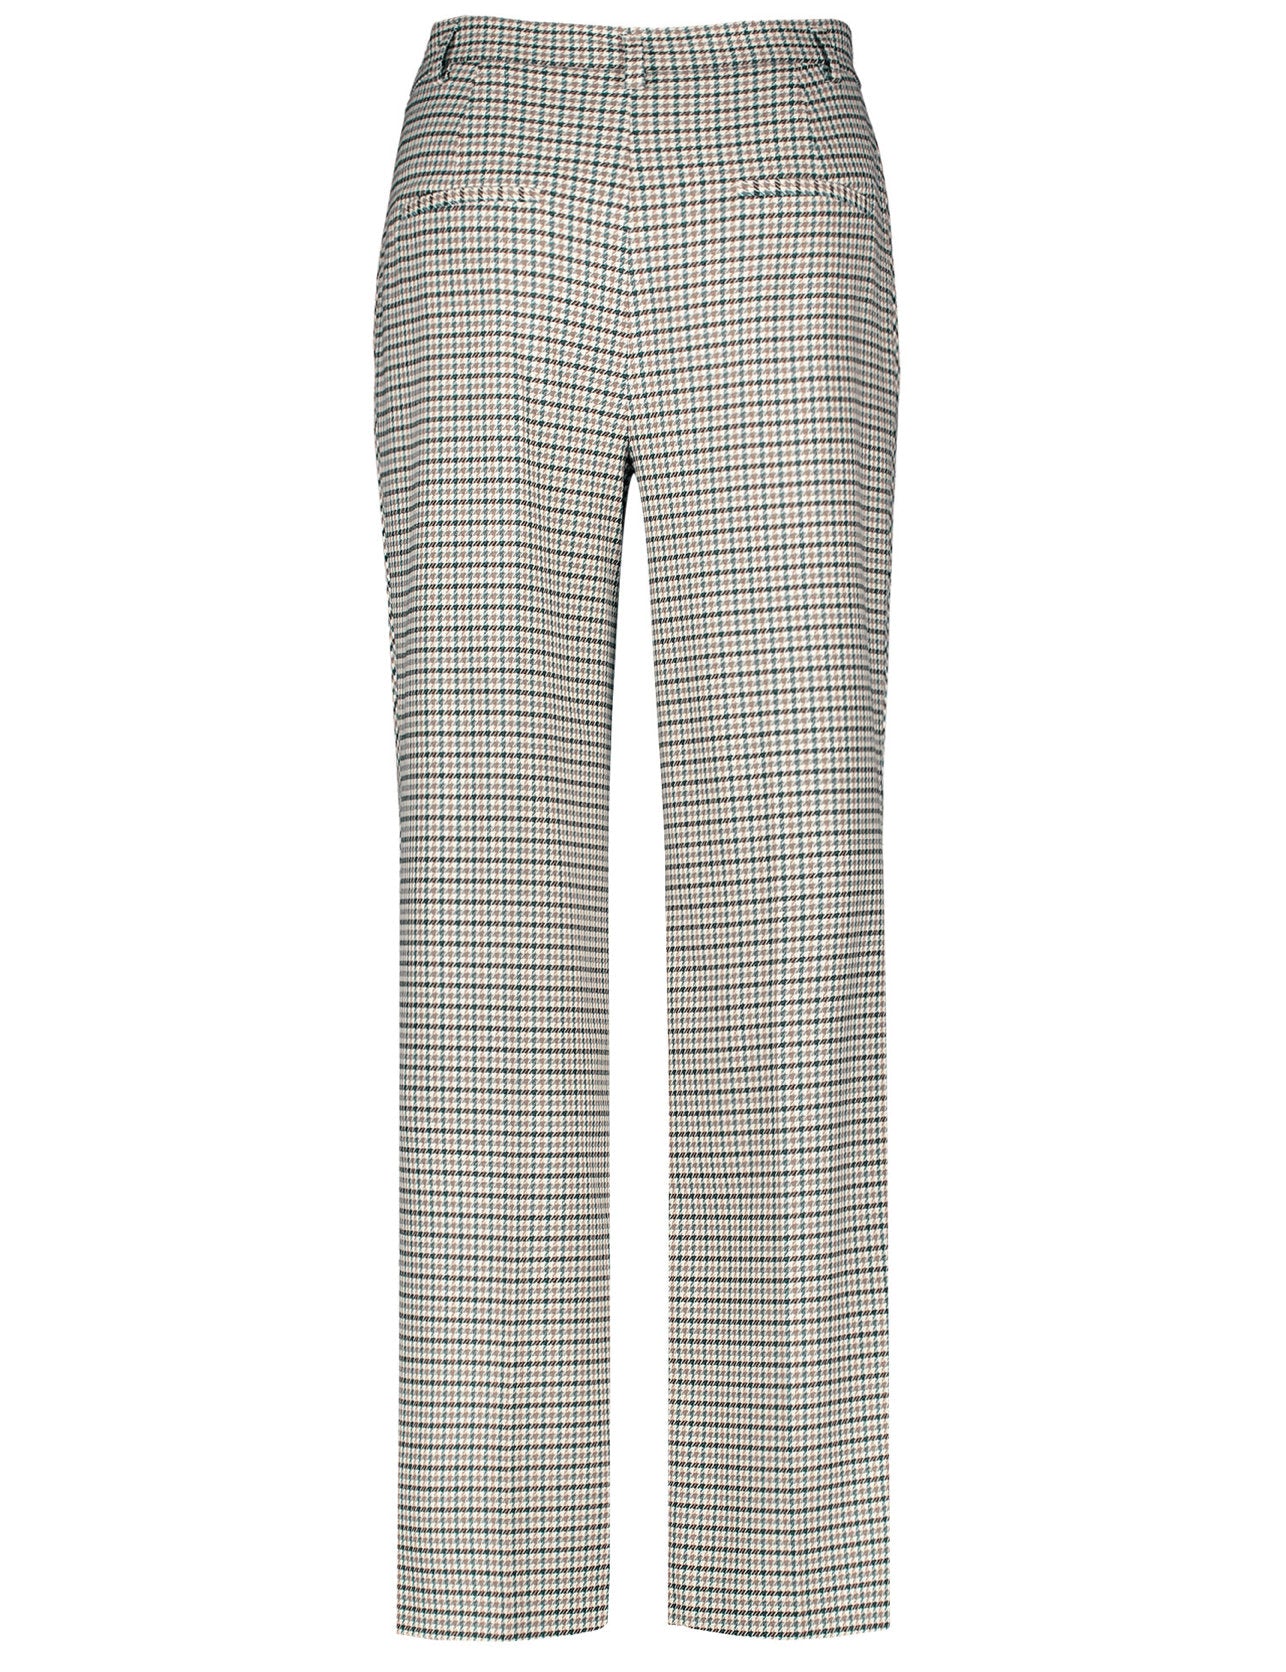 Chic Cloth Trousers With A Wide Leg_220046-31327_9055_03